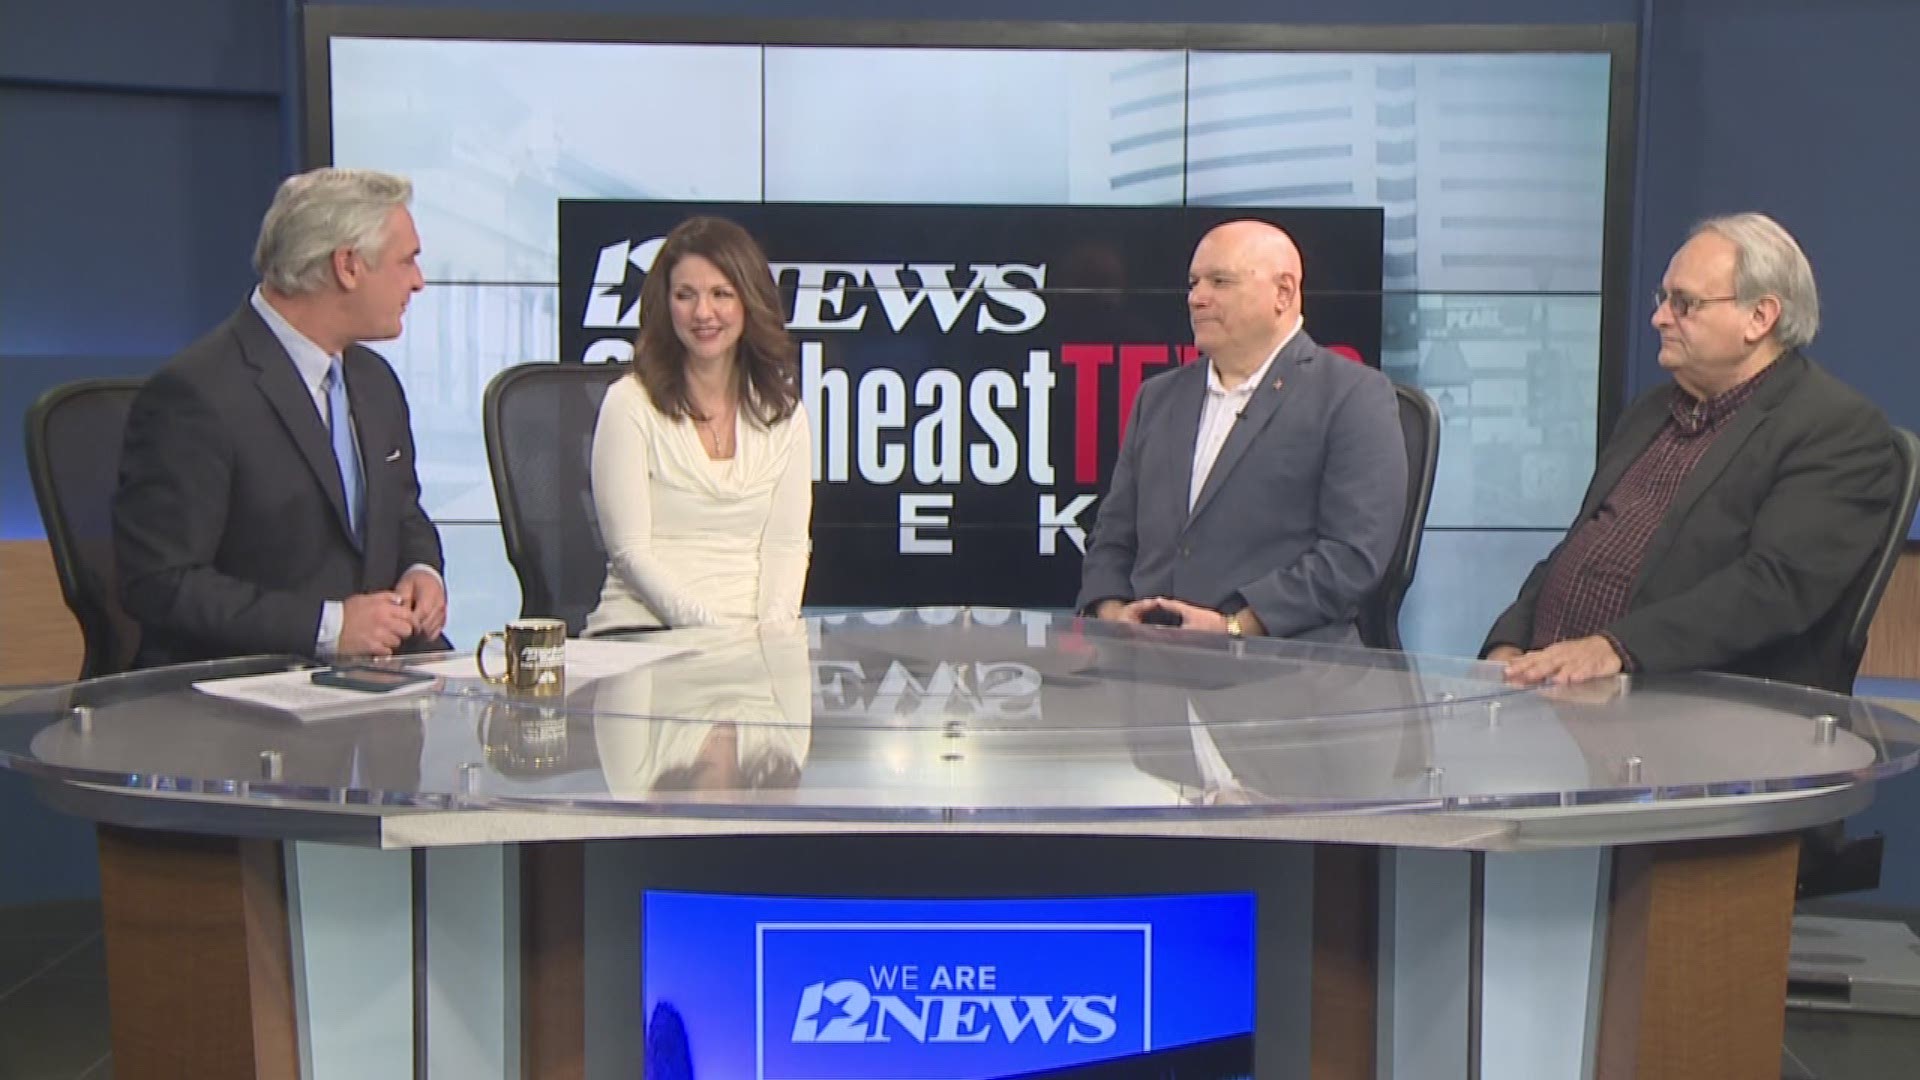 Southeast Texas Weekly is a political round table featuring Southeast Texans. 12News' Kevin Steele hosts along with guests, WL Pate, Kristy Wendler, Todd Hickman, Kent Batman, Jeff Lewis, Godfrey Leggett & Fernando Ramirez